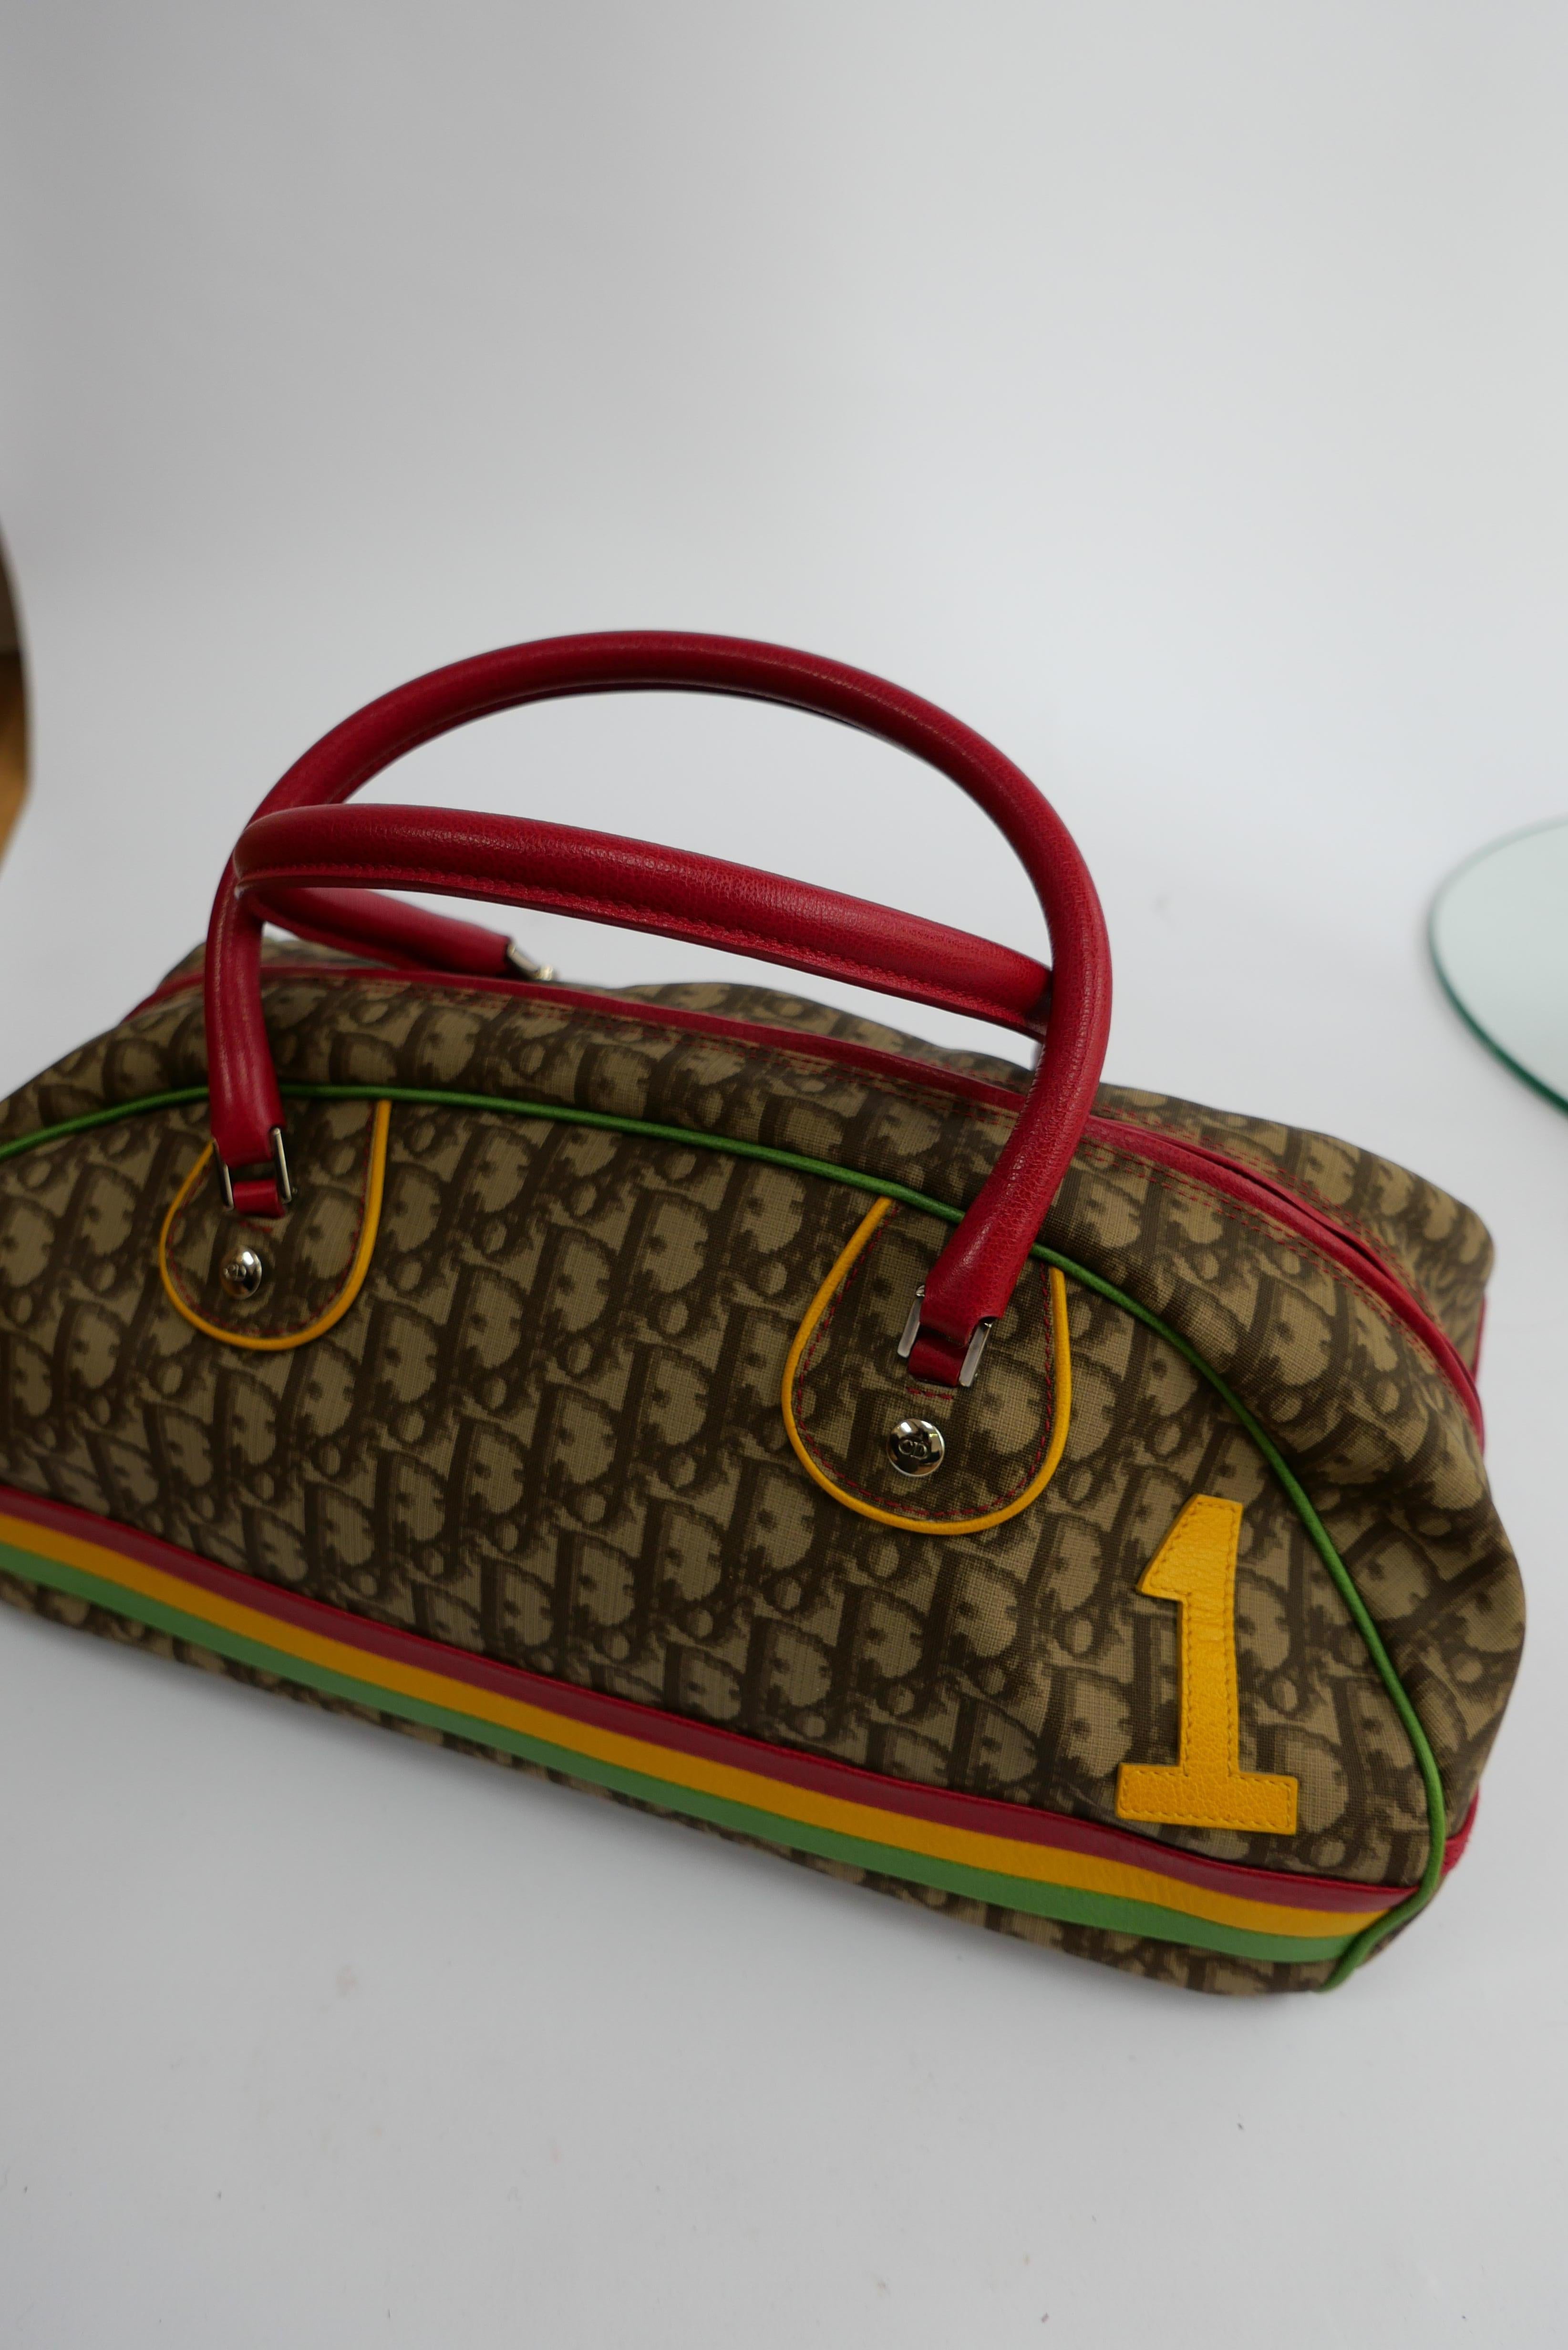 Christian Dior A/W 2004 Bag Rasta Collection 
This piece is from the Autumn Winter 2004 Dior collection designer by John Galliano. Galliano was inspired by Rastafarian's in Jamaica and uses the colours of the Rasta flag thoughout the collection and